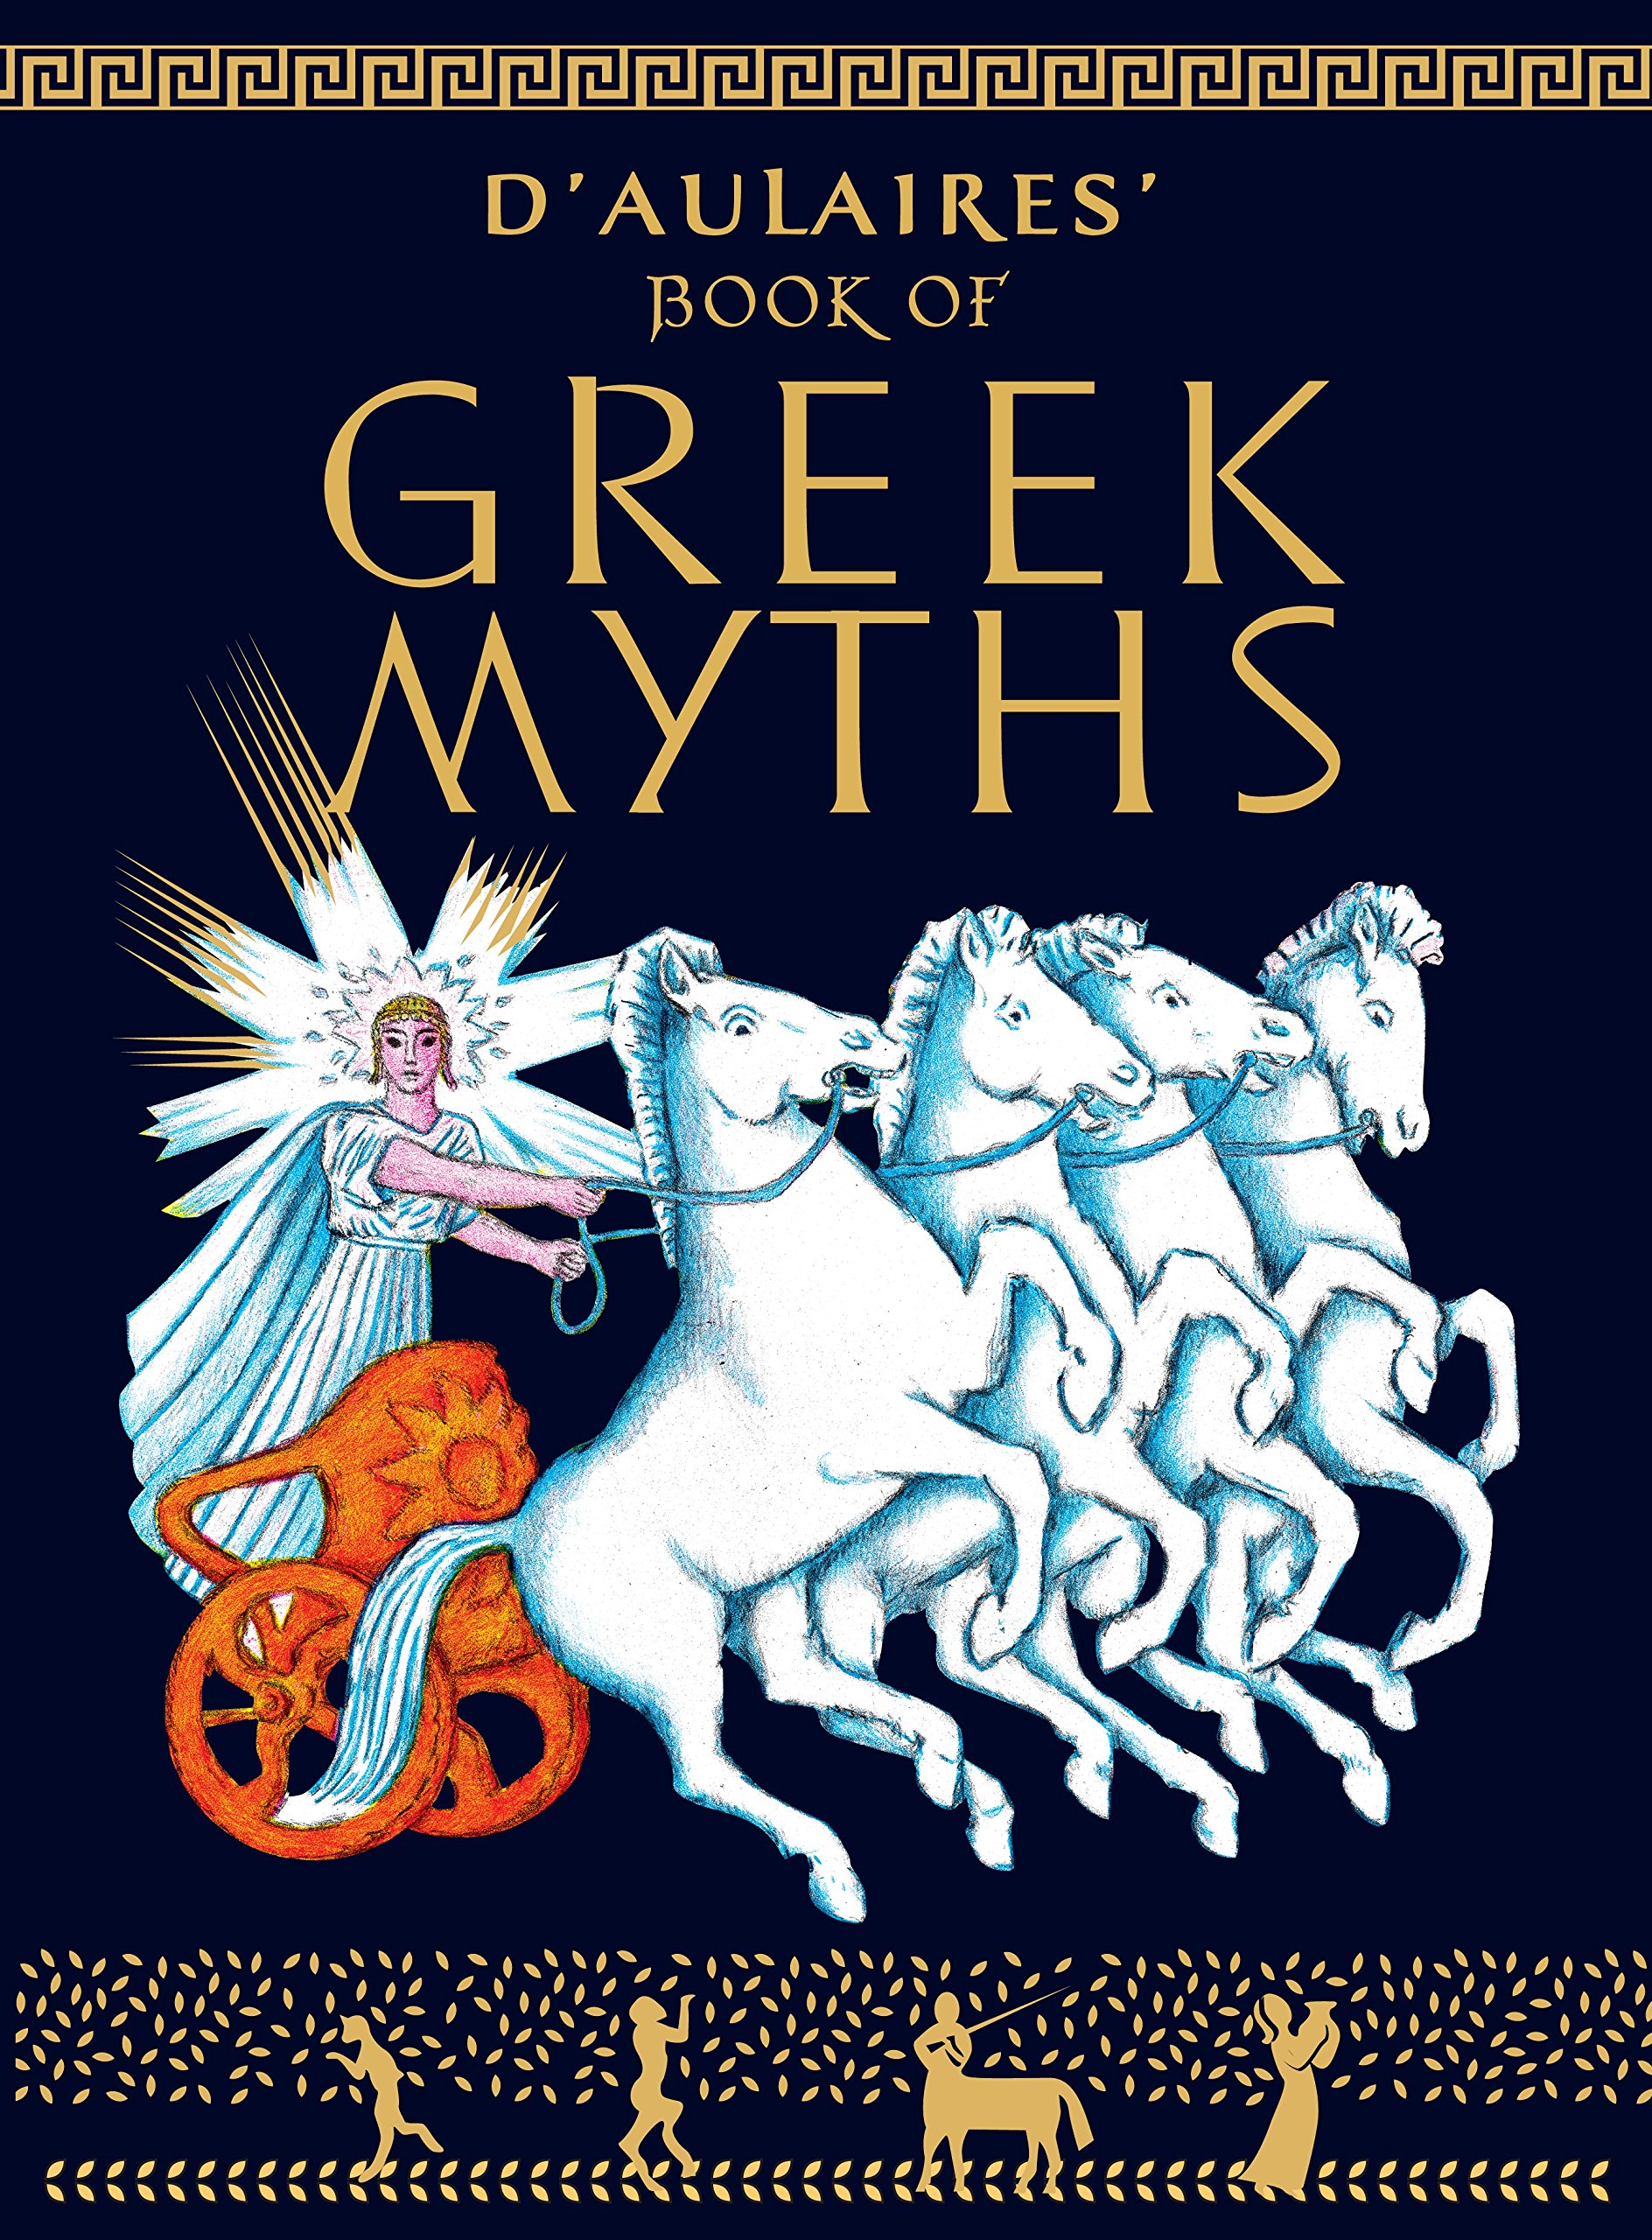 D'Aulaires Book of Greek Myths (eBook) by Ingri d'Aulaire, Edgar Parin d'Aulaire $1.99